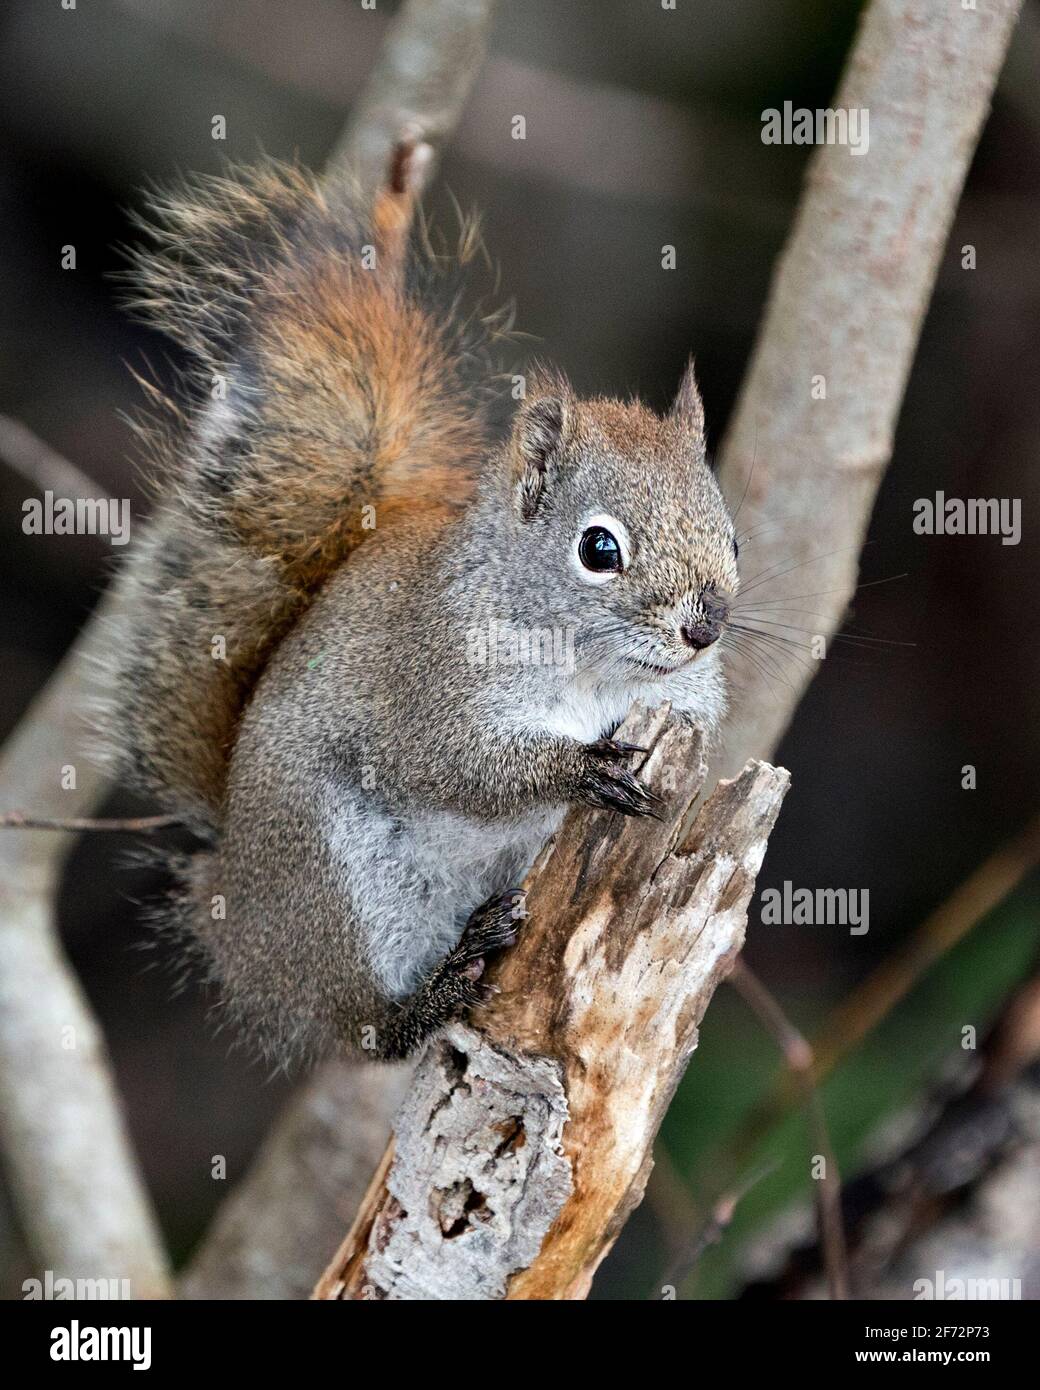 Squirrel close-up profile view in the forest standing on a branch with a blur background displaying its brown fur, paws, bushy tail, in its habitat . Stock Photo